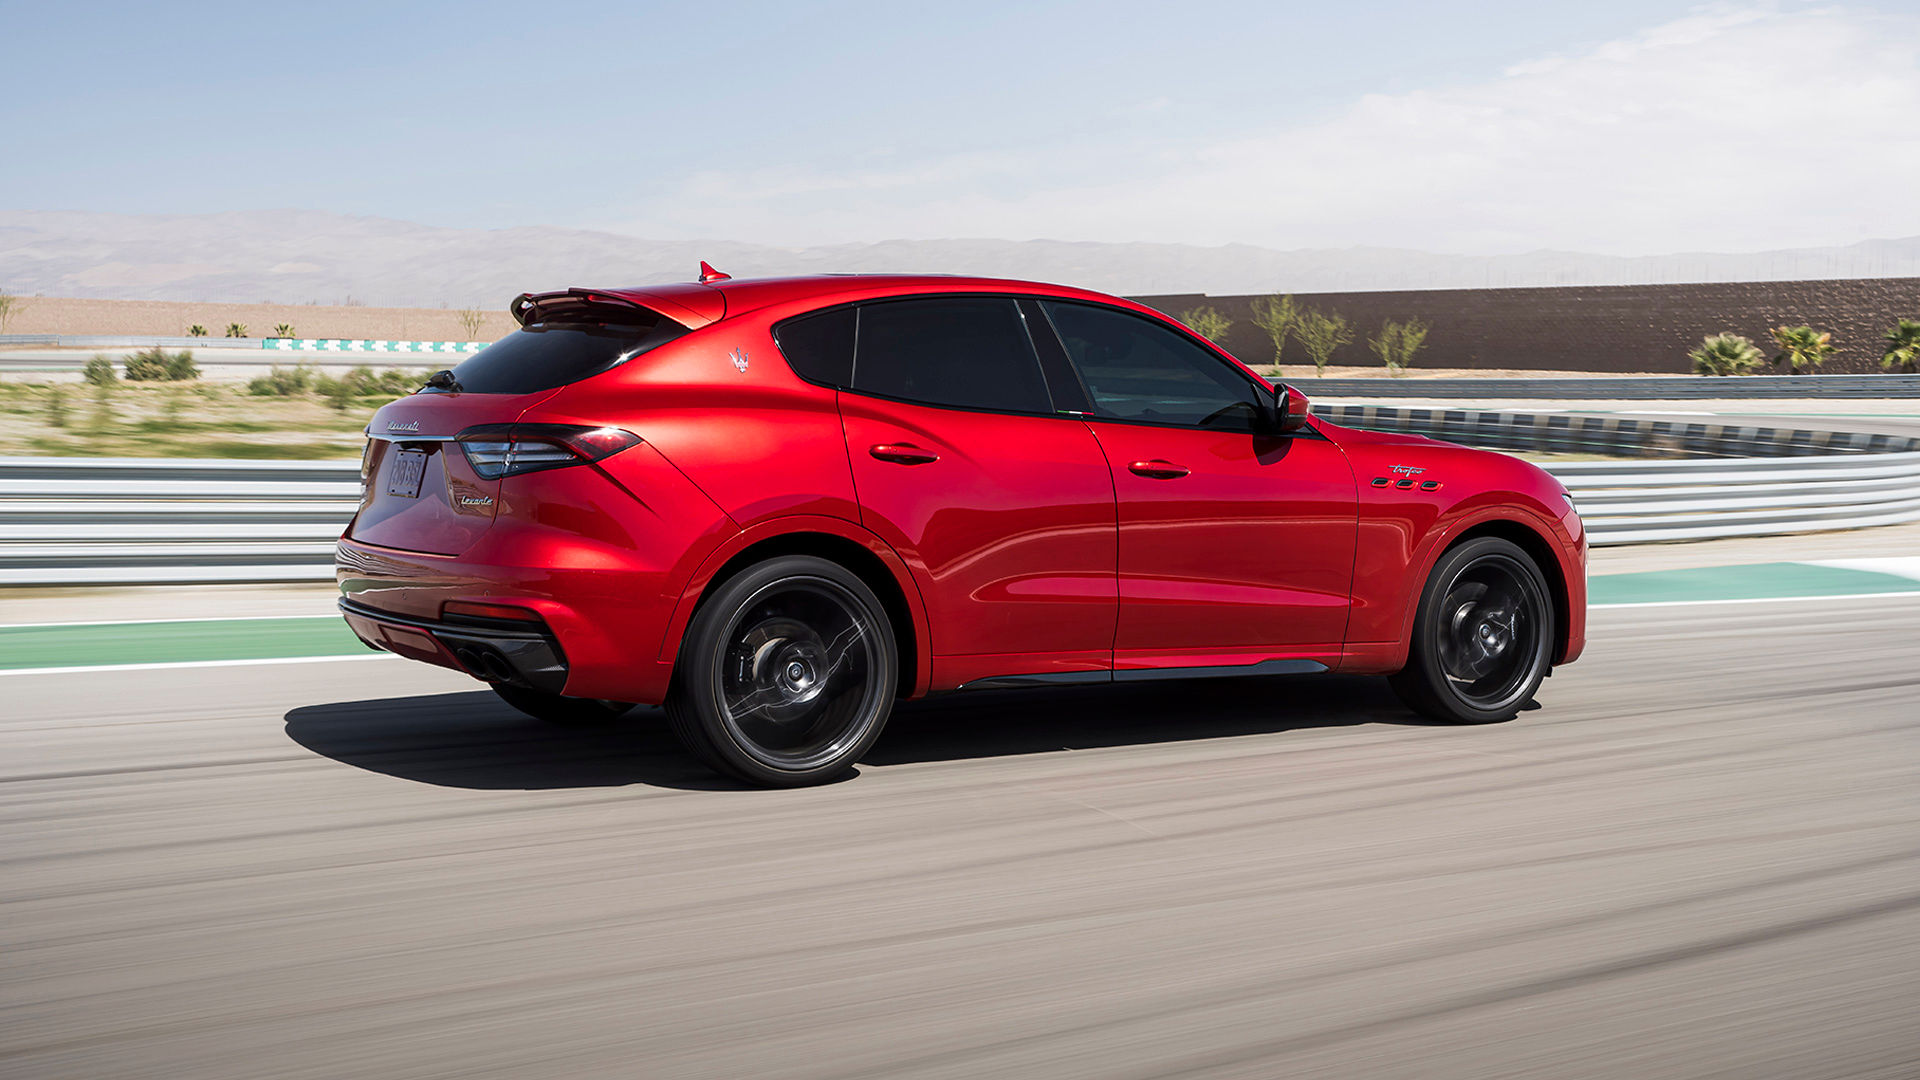 The 2022 Maserati Levante shows off as a performance SUV.